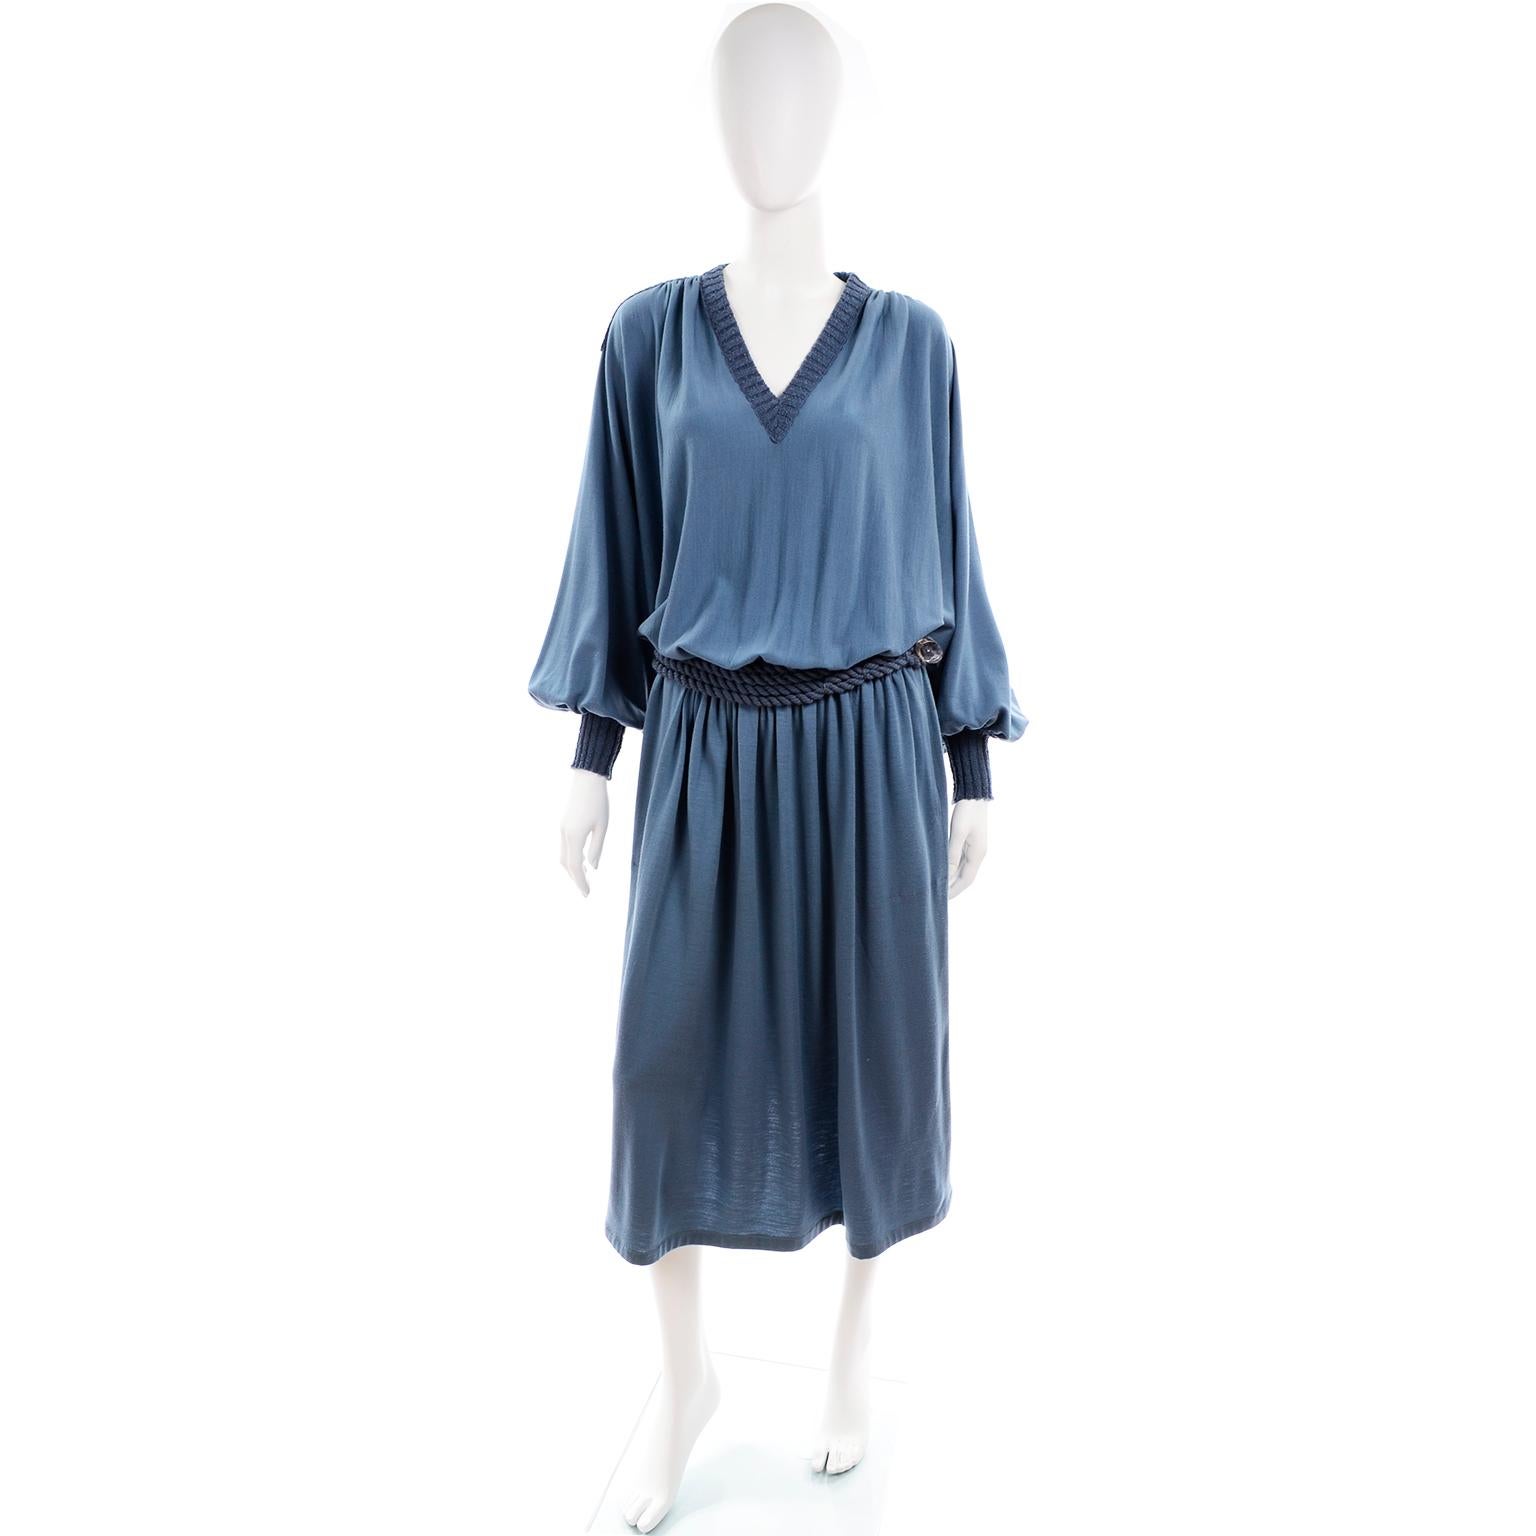 This is a vintage Missoni blue wool knit dress from 1973.  This iconic 1970's dress has a drop elastic waist and a pretty rope belt with a lucite clasp.  The dress has knit trim on the cuffs, shoulders and collar and slips overhead with no closures.